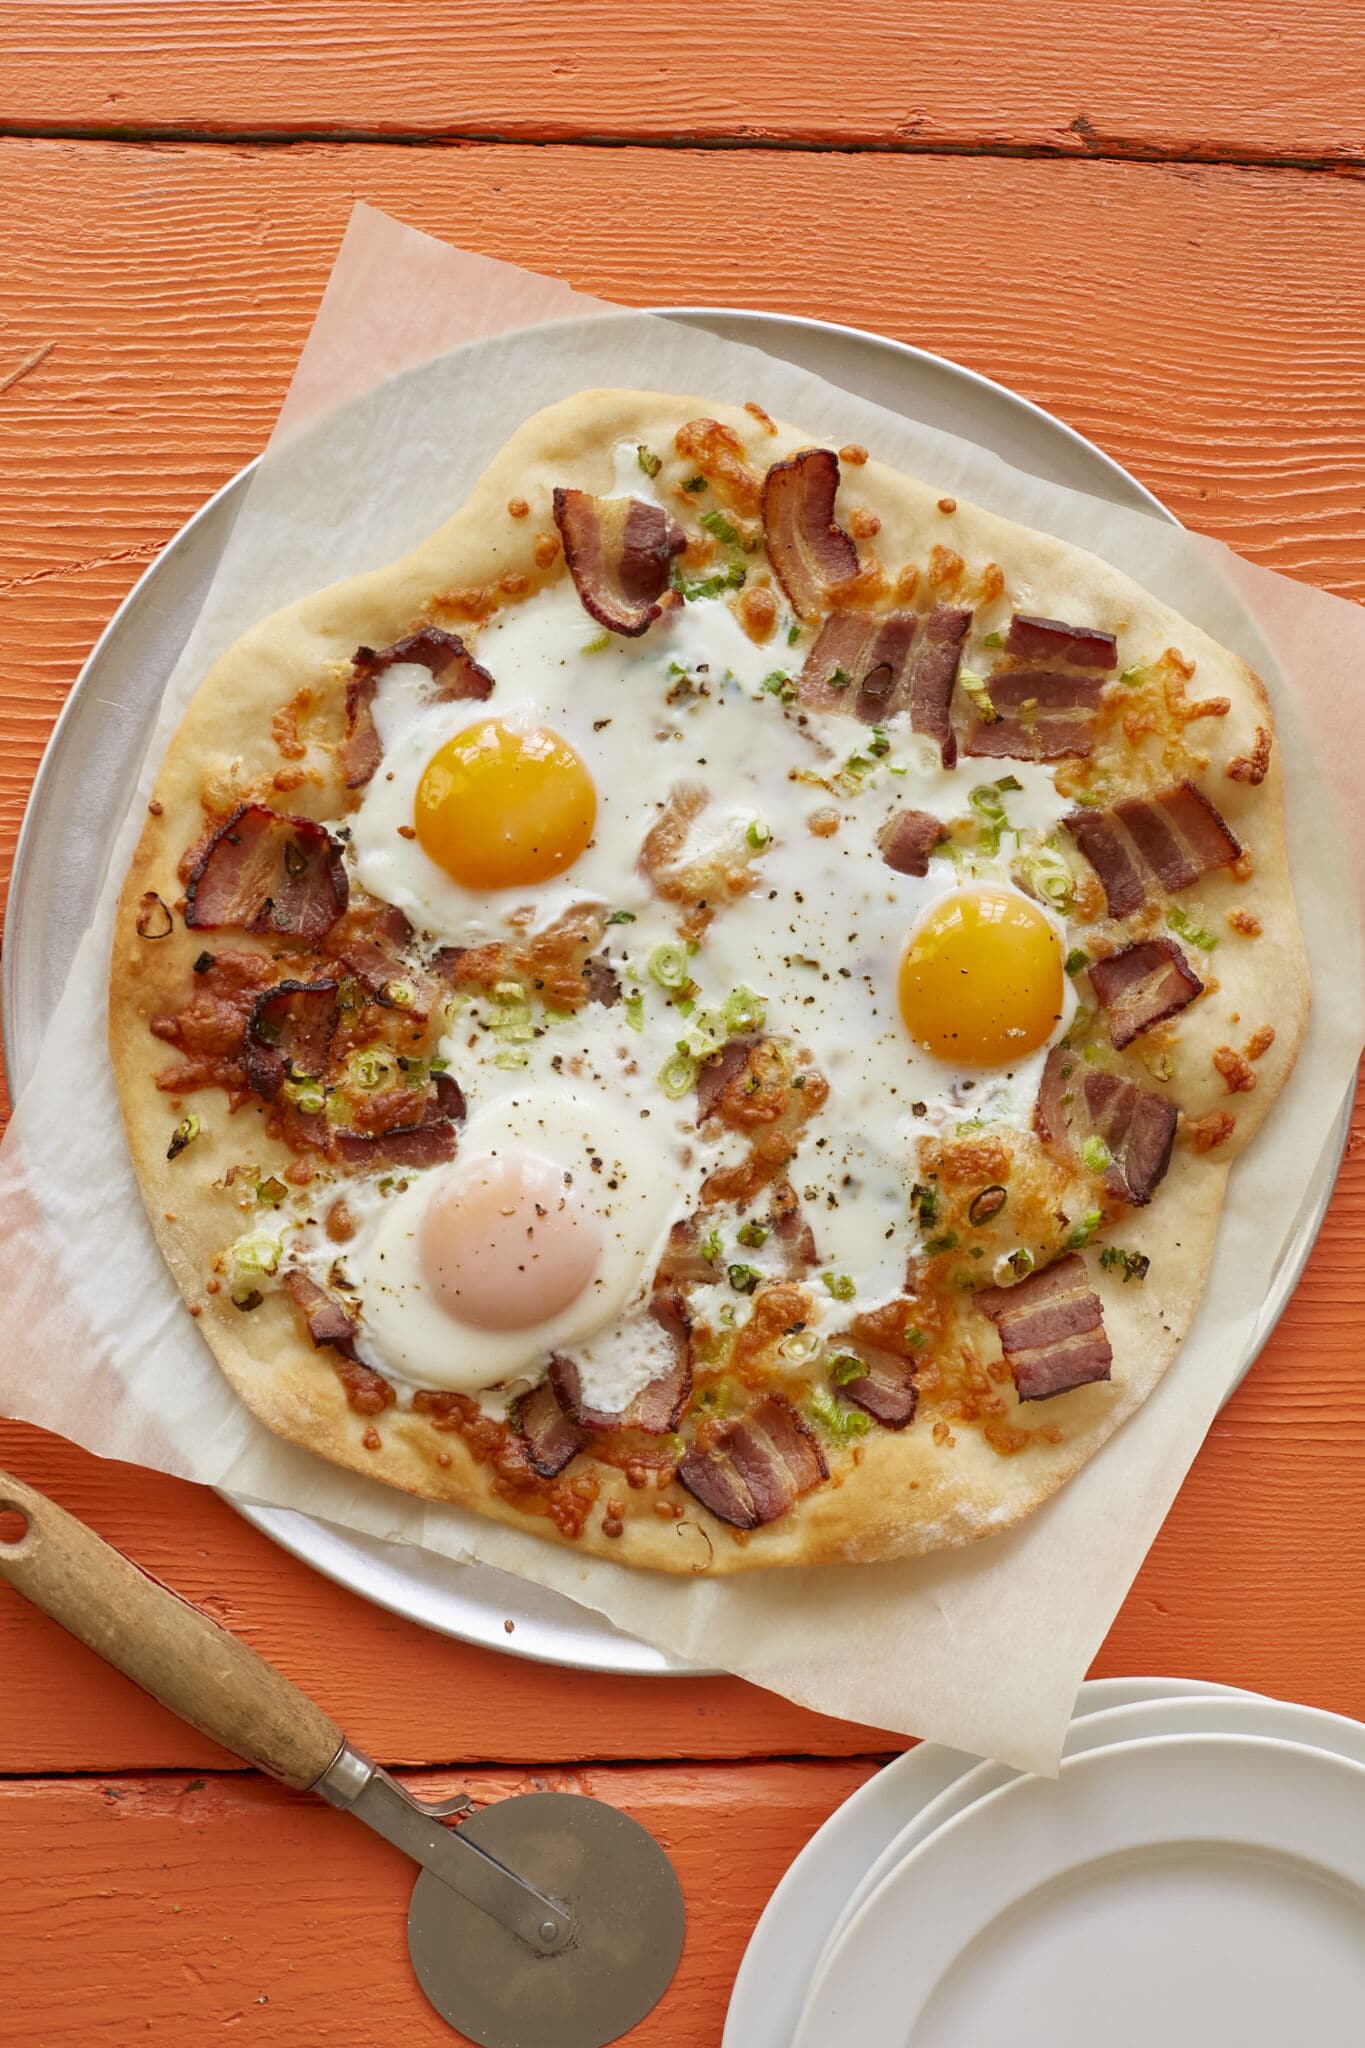 Wholesome breakfast pizza has golden and crispy crust, with smoky bacon, green onions, and sunny-side-up eggs bringing layers of savory flavor. 